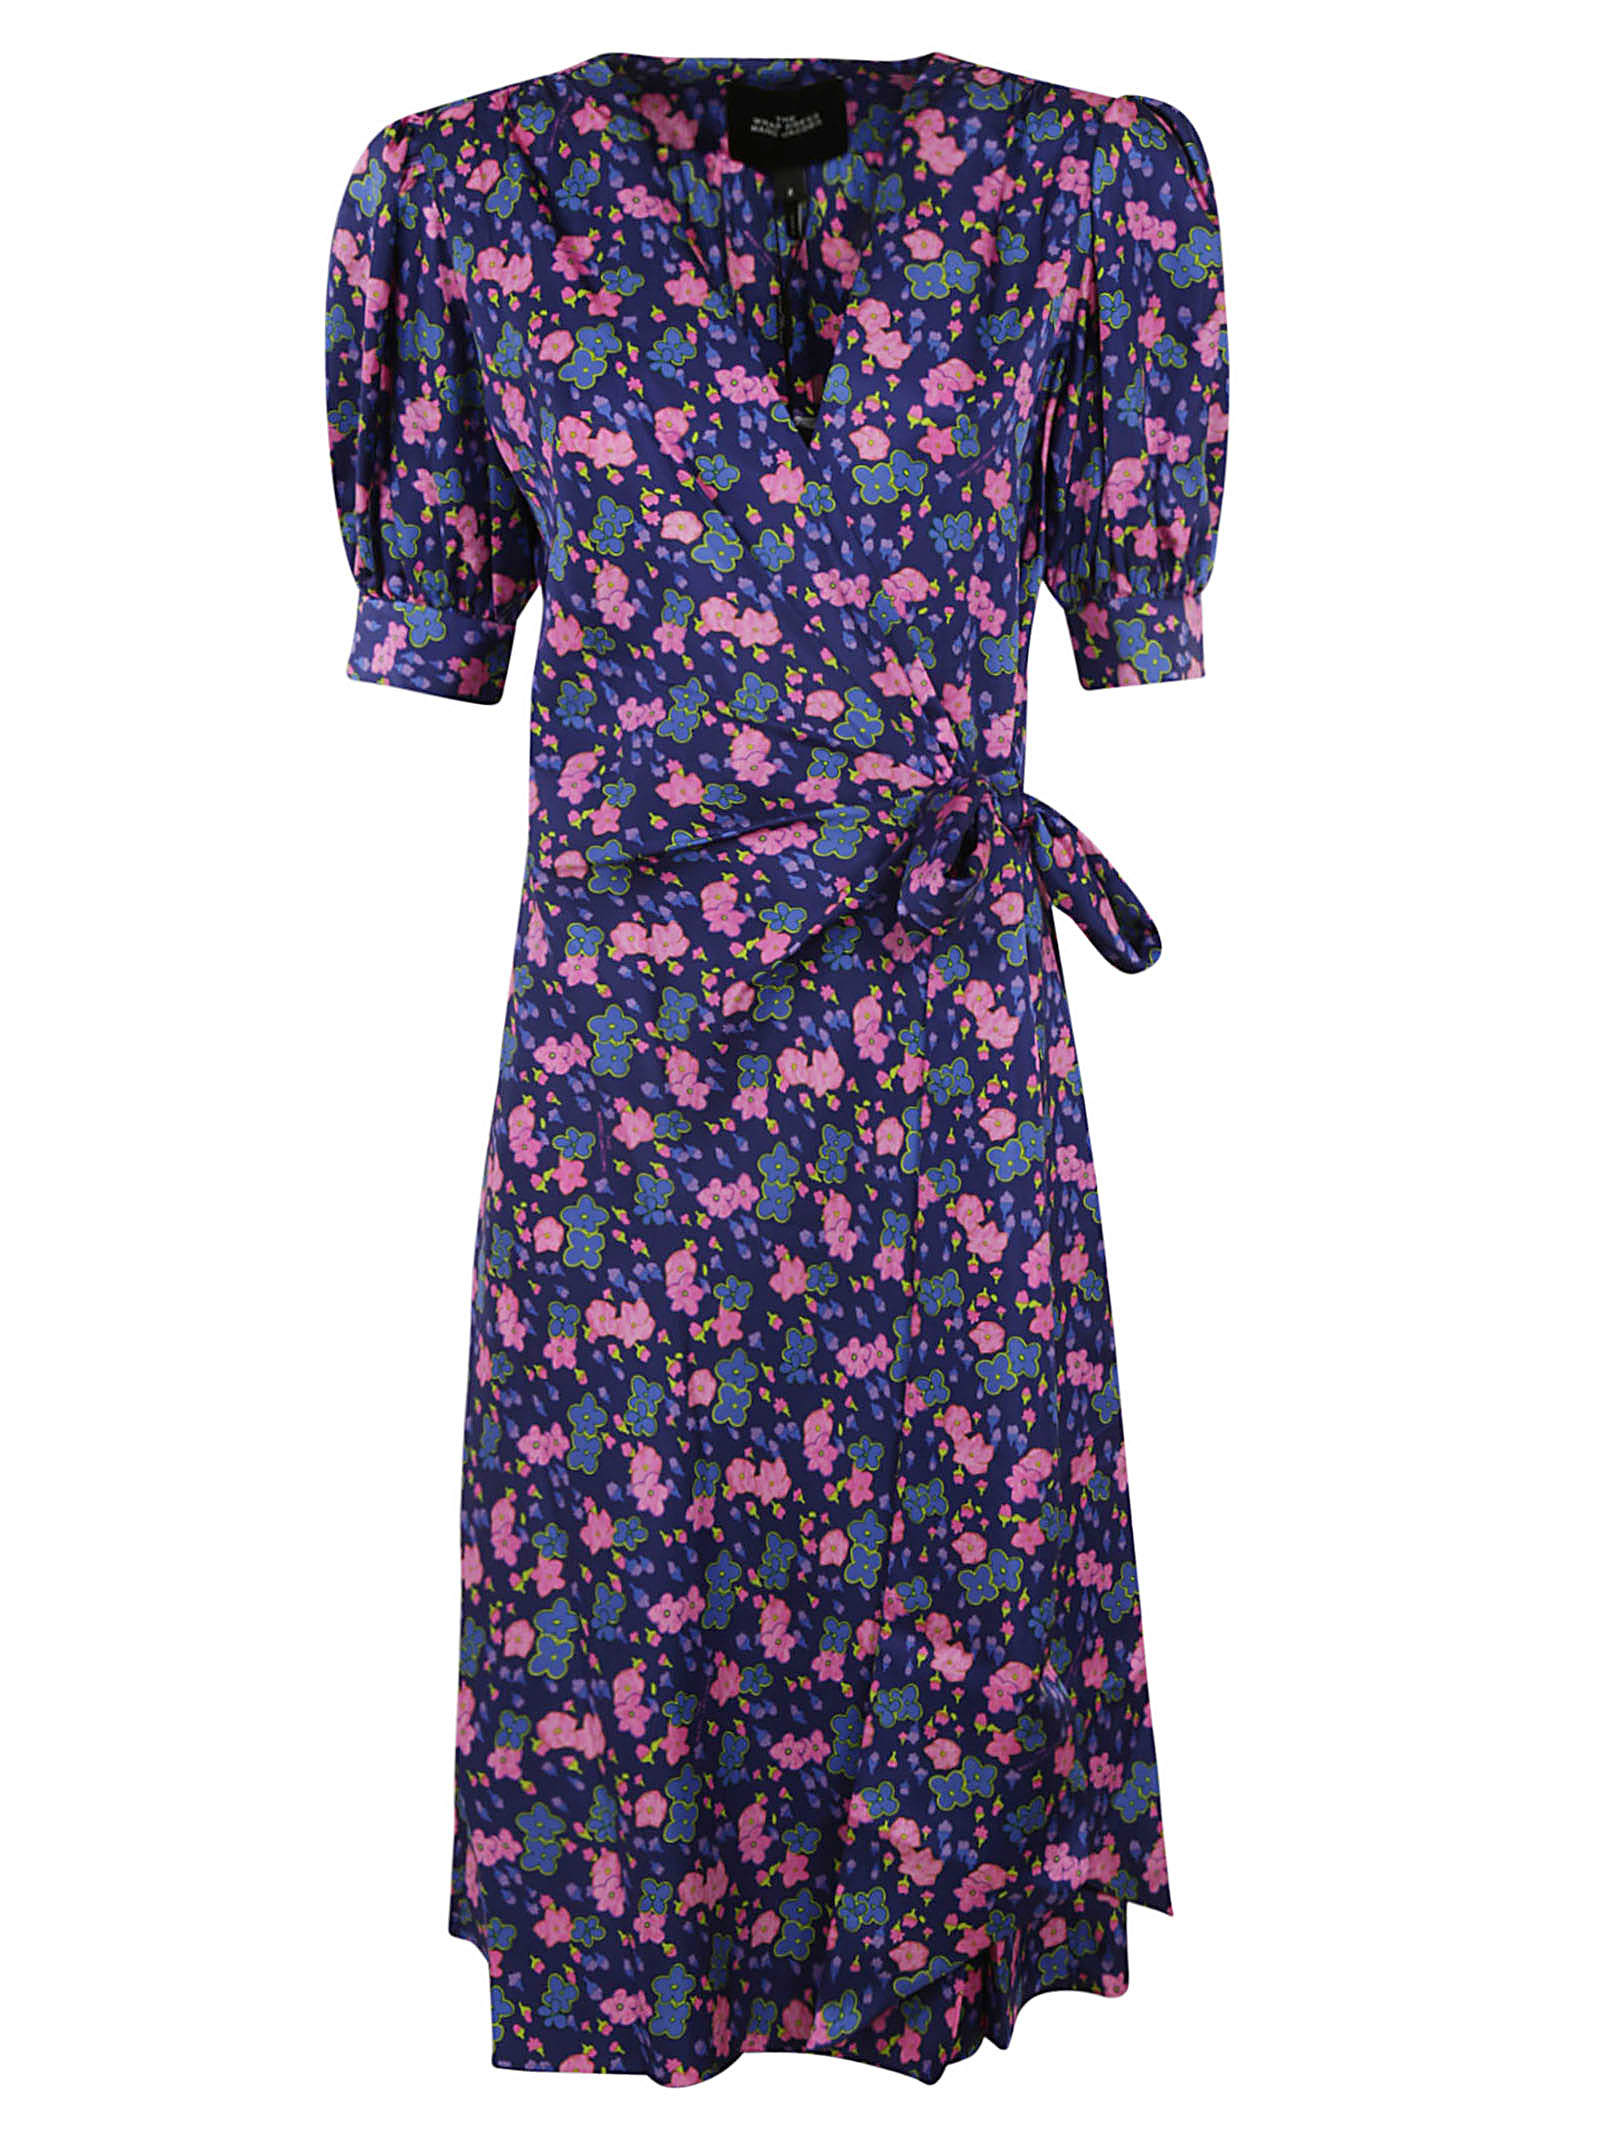 MARC JACOBS BOW-TIED WAIST FLORAL PRINT DRESS,11214929